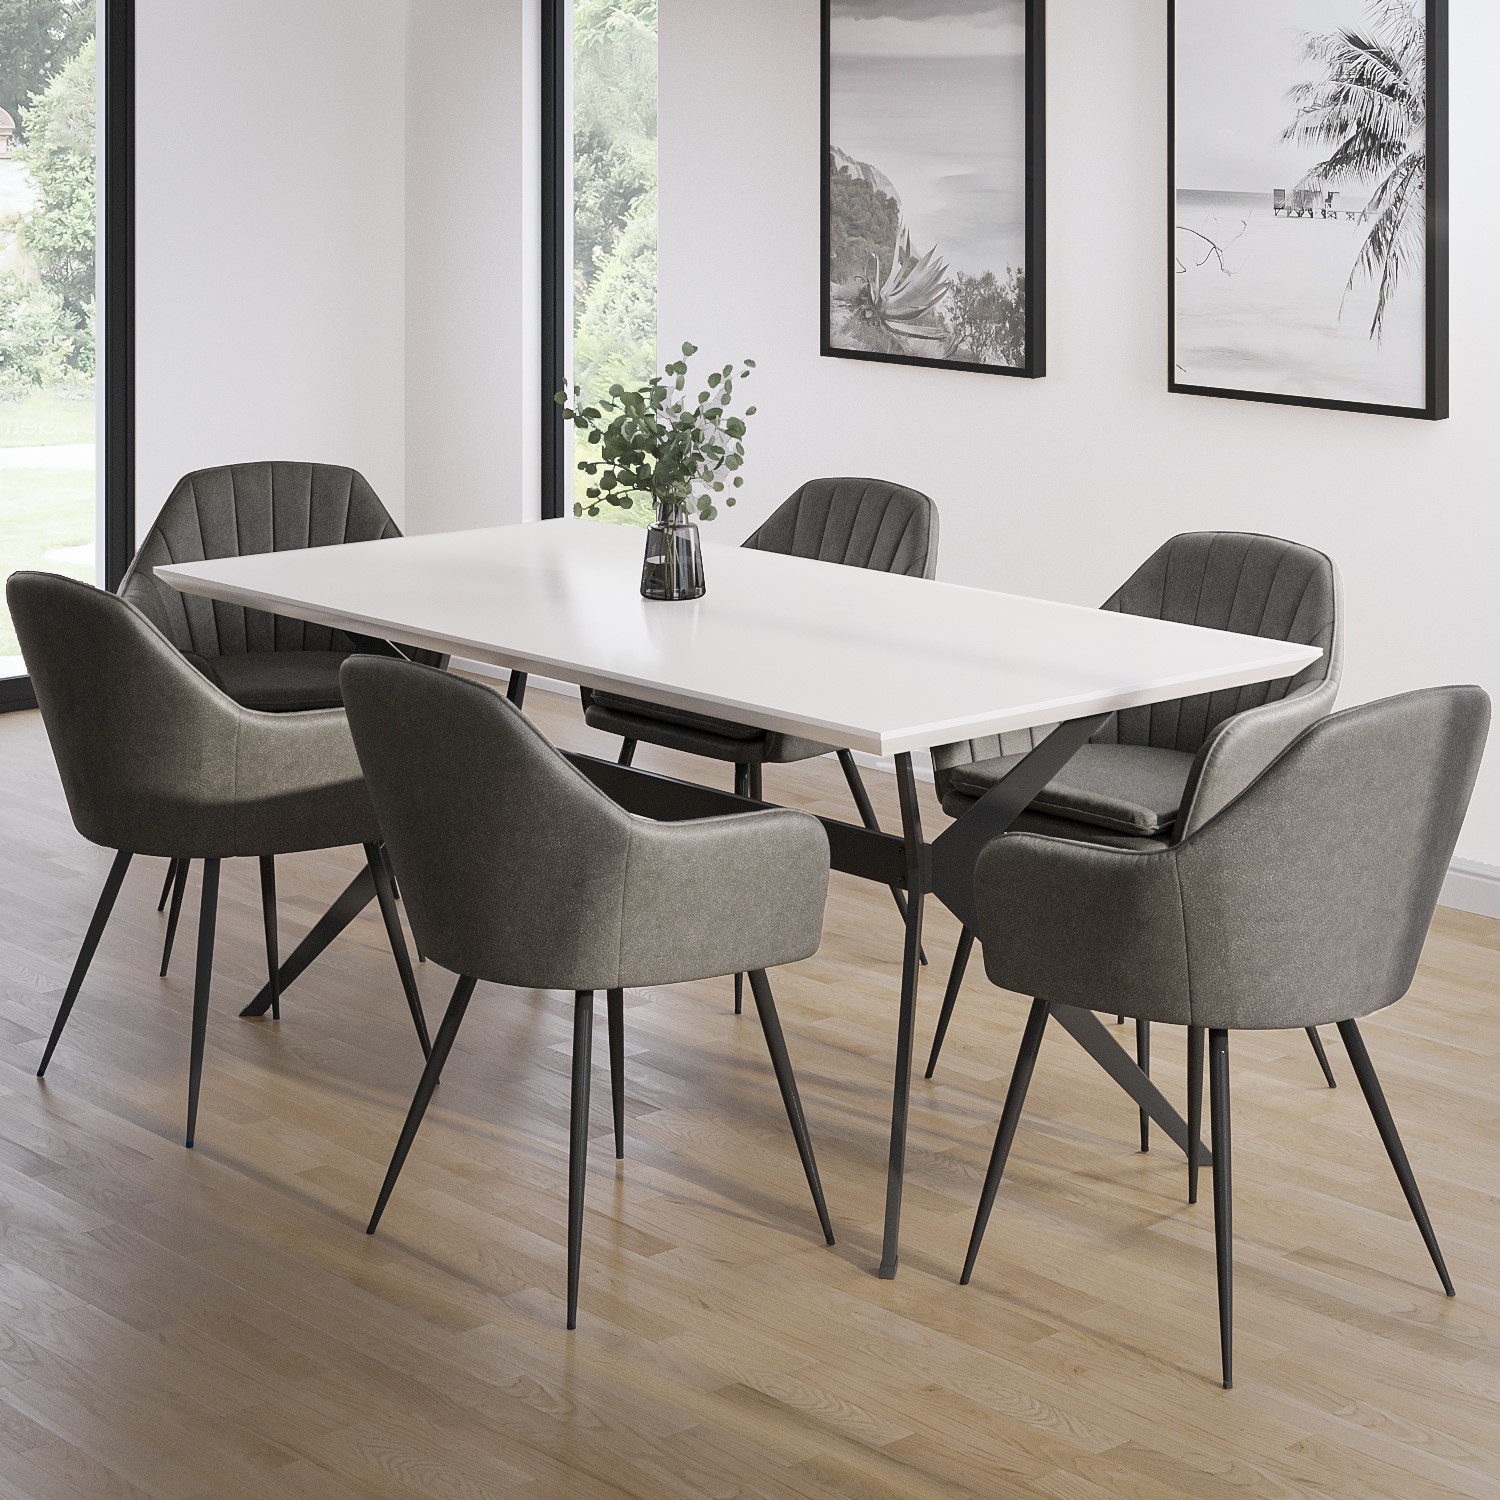 Large White Gloss Modern Dining Table - Seats 6 - Rochelle